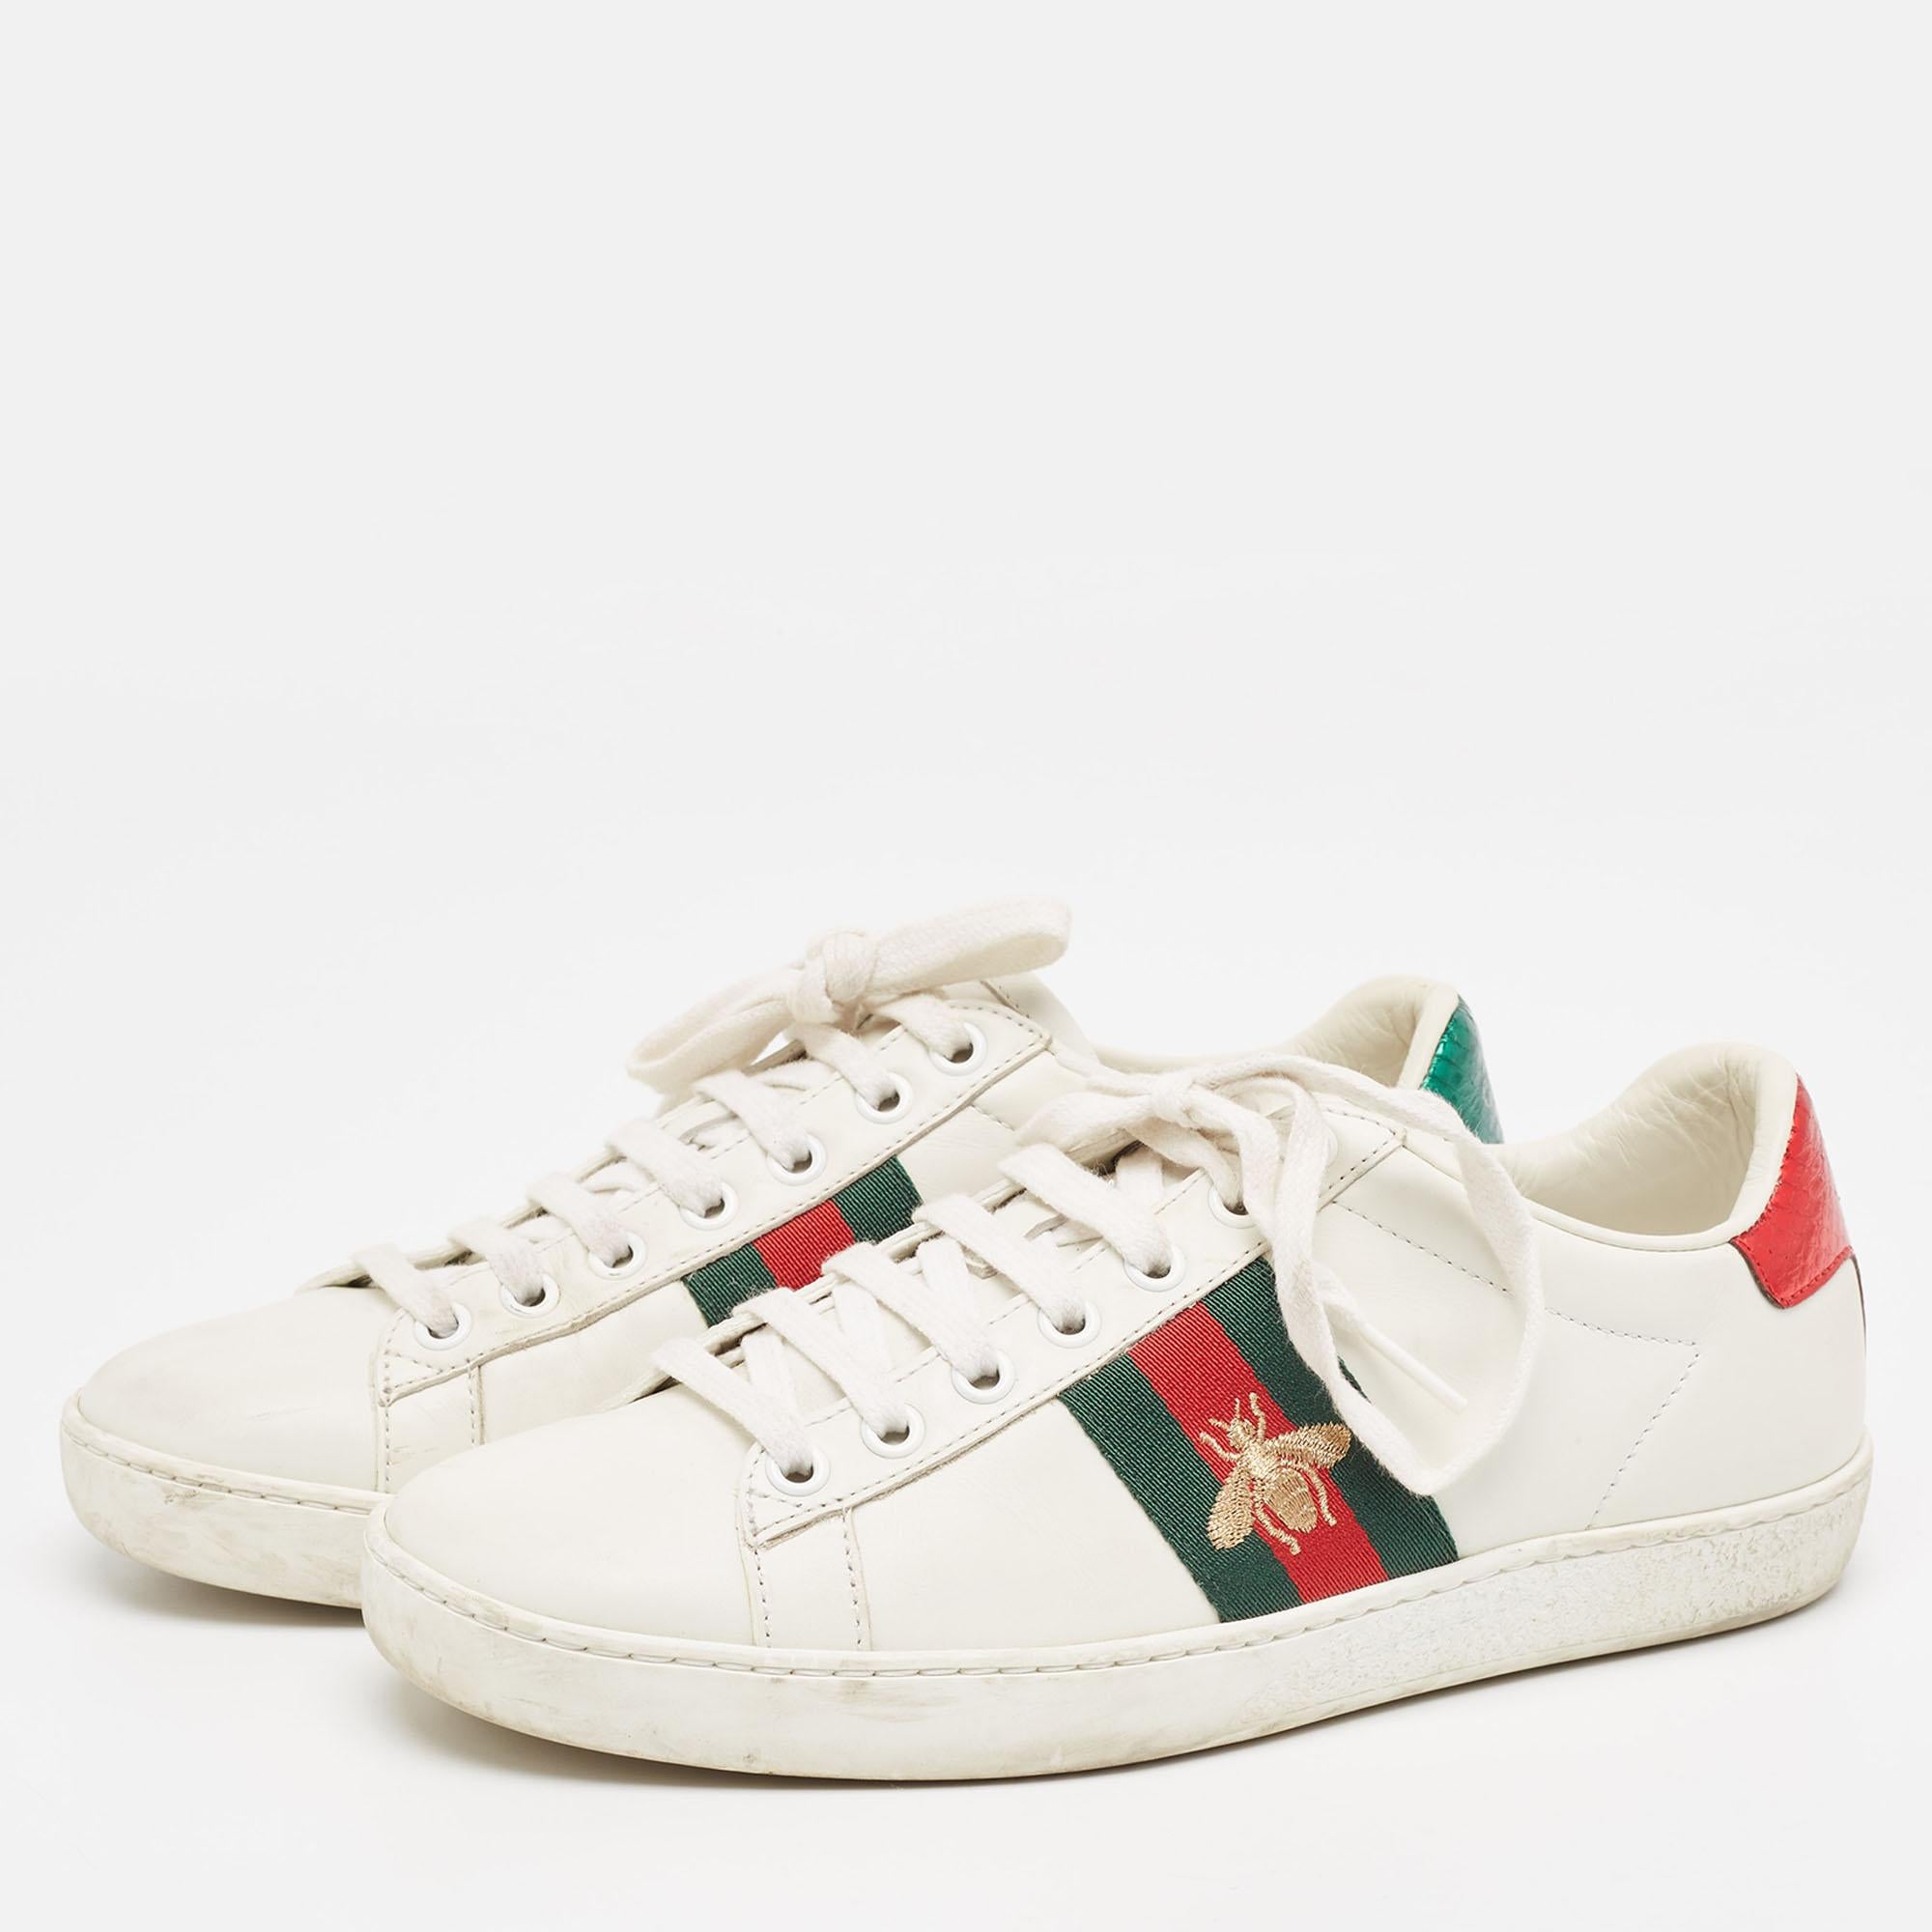 Gucci White Leather Embroidered Bee Ace Sneakers Size 36 For Sale 4